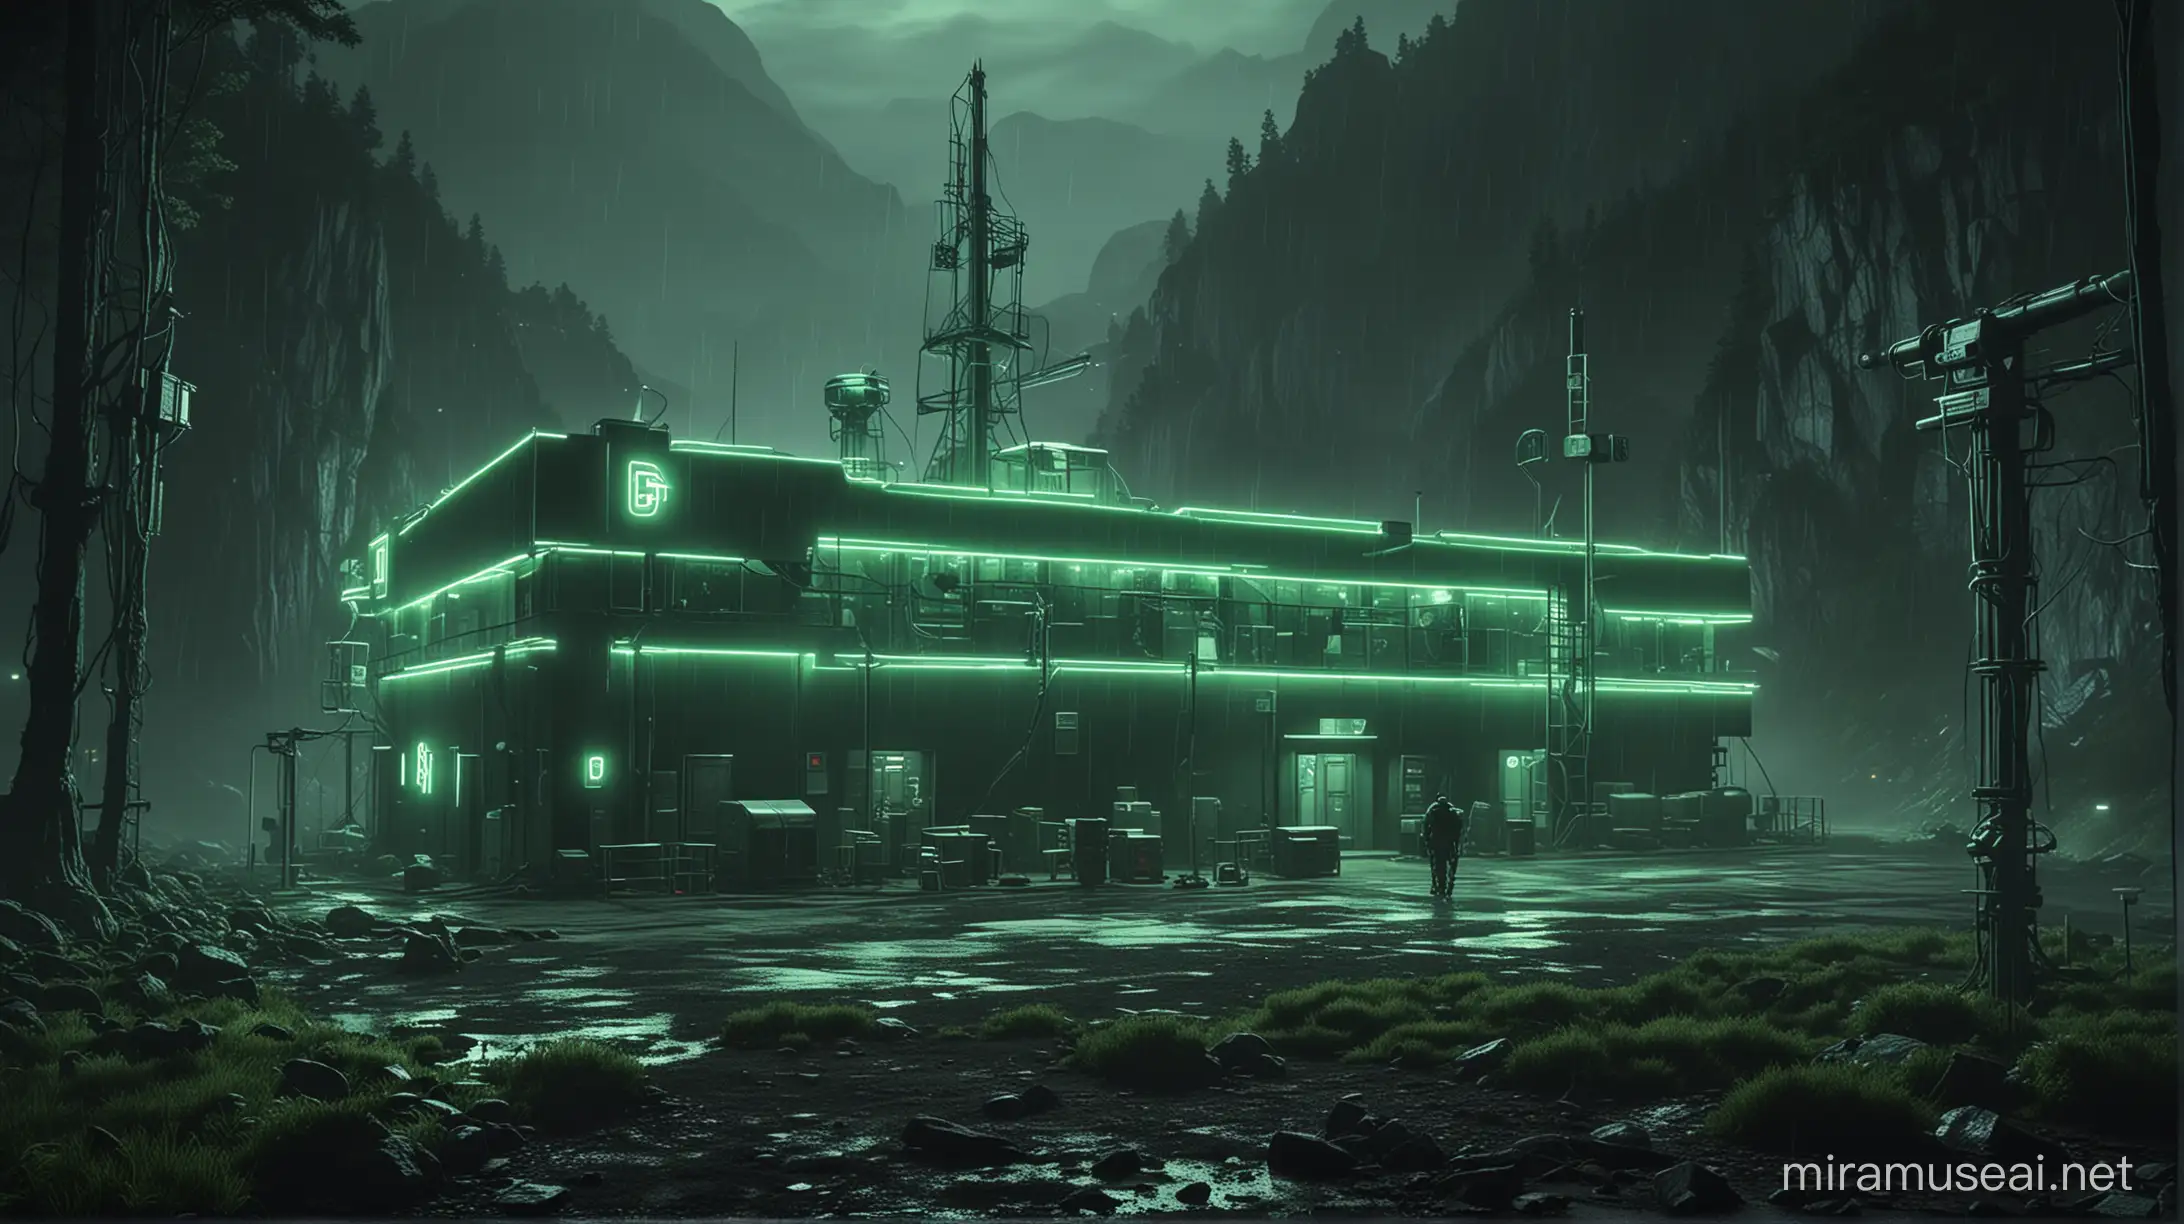 Realistic research centers with one worker around it, green neon and huge neon lights inside the part, its color shadow on the floor, Rainy weather, staff in dark green uniforms and helmets, Atmospheric and cinematic, The huge structures, A dark green smoke rose from the research centers environment and spread in the air, The image space is outside the realistic research center.
with huge satellite antennas,
A huge cubic green neon object,
in the Realistic mountains.
atmospheric and cinematic.
All overall dark green image theme.
Very big lights and lots of green neon lights.
The neon lights in the image should be very bright throughout the image.
The neon lights in the picture should be very bright in the dark
The neon lights in the picture should be very bright.
Very large and bright neon lamps in the structure.
Shades of green throughout the image.
in full detail.
3D.